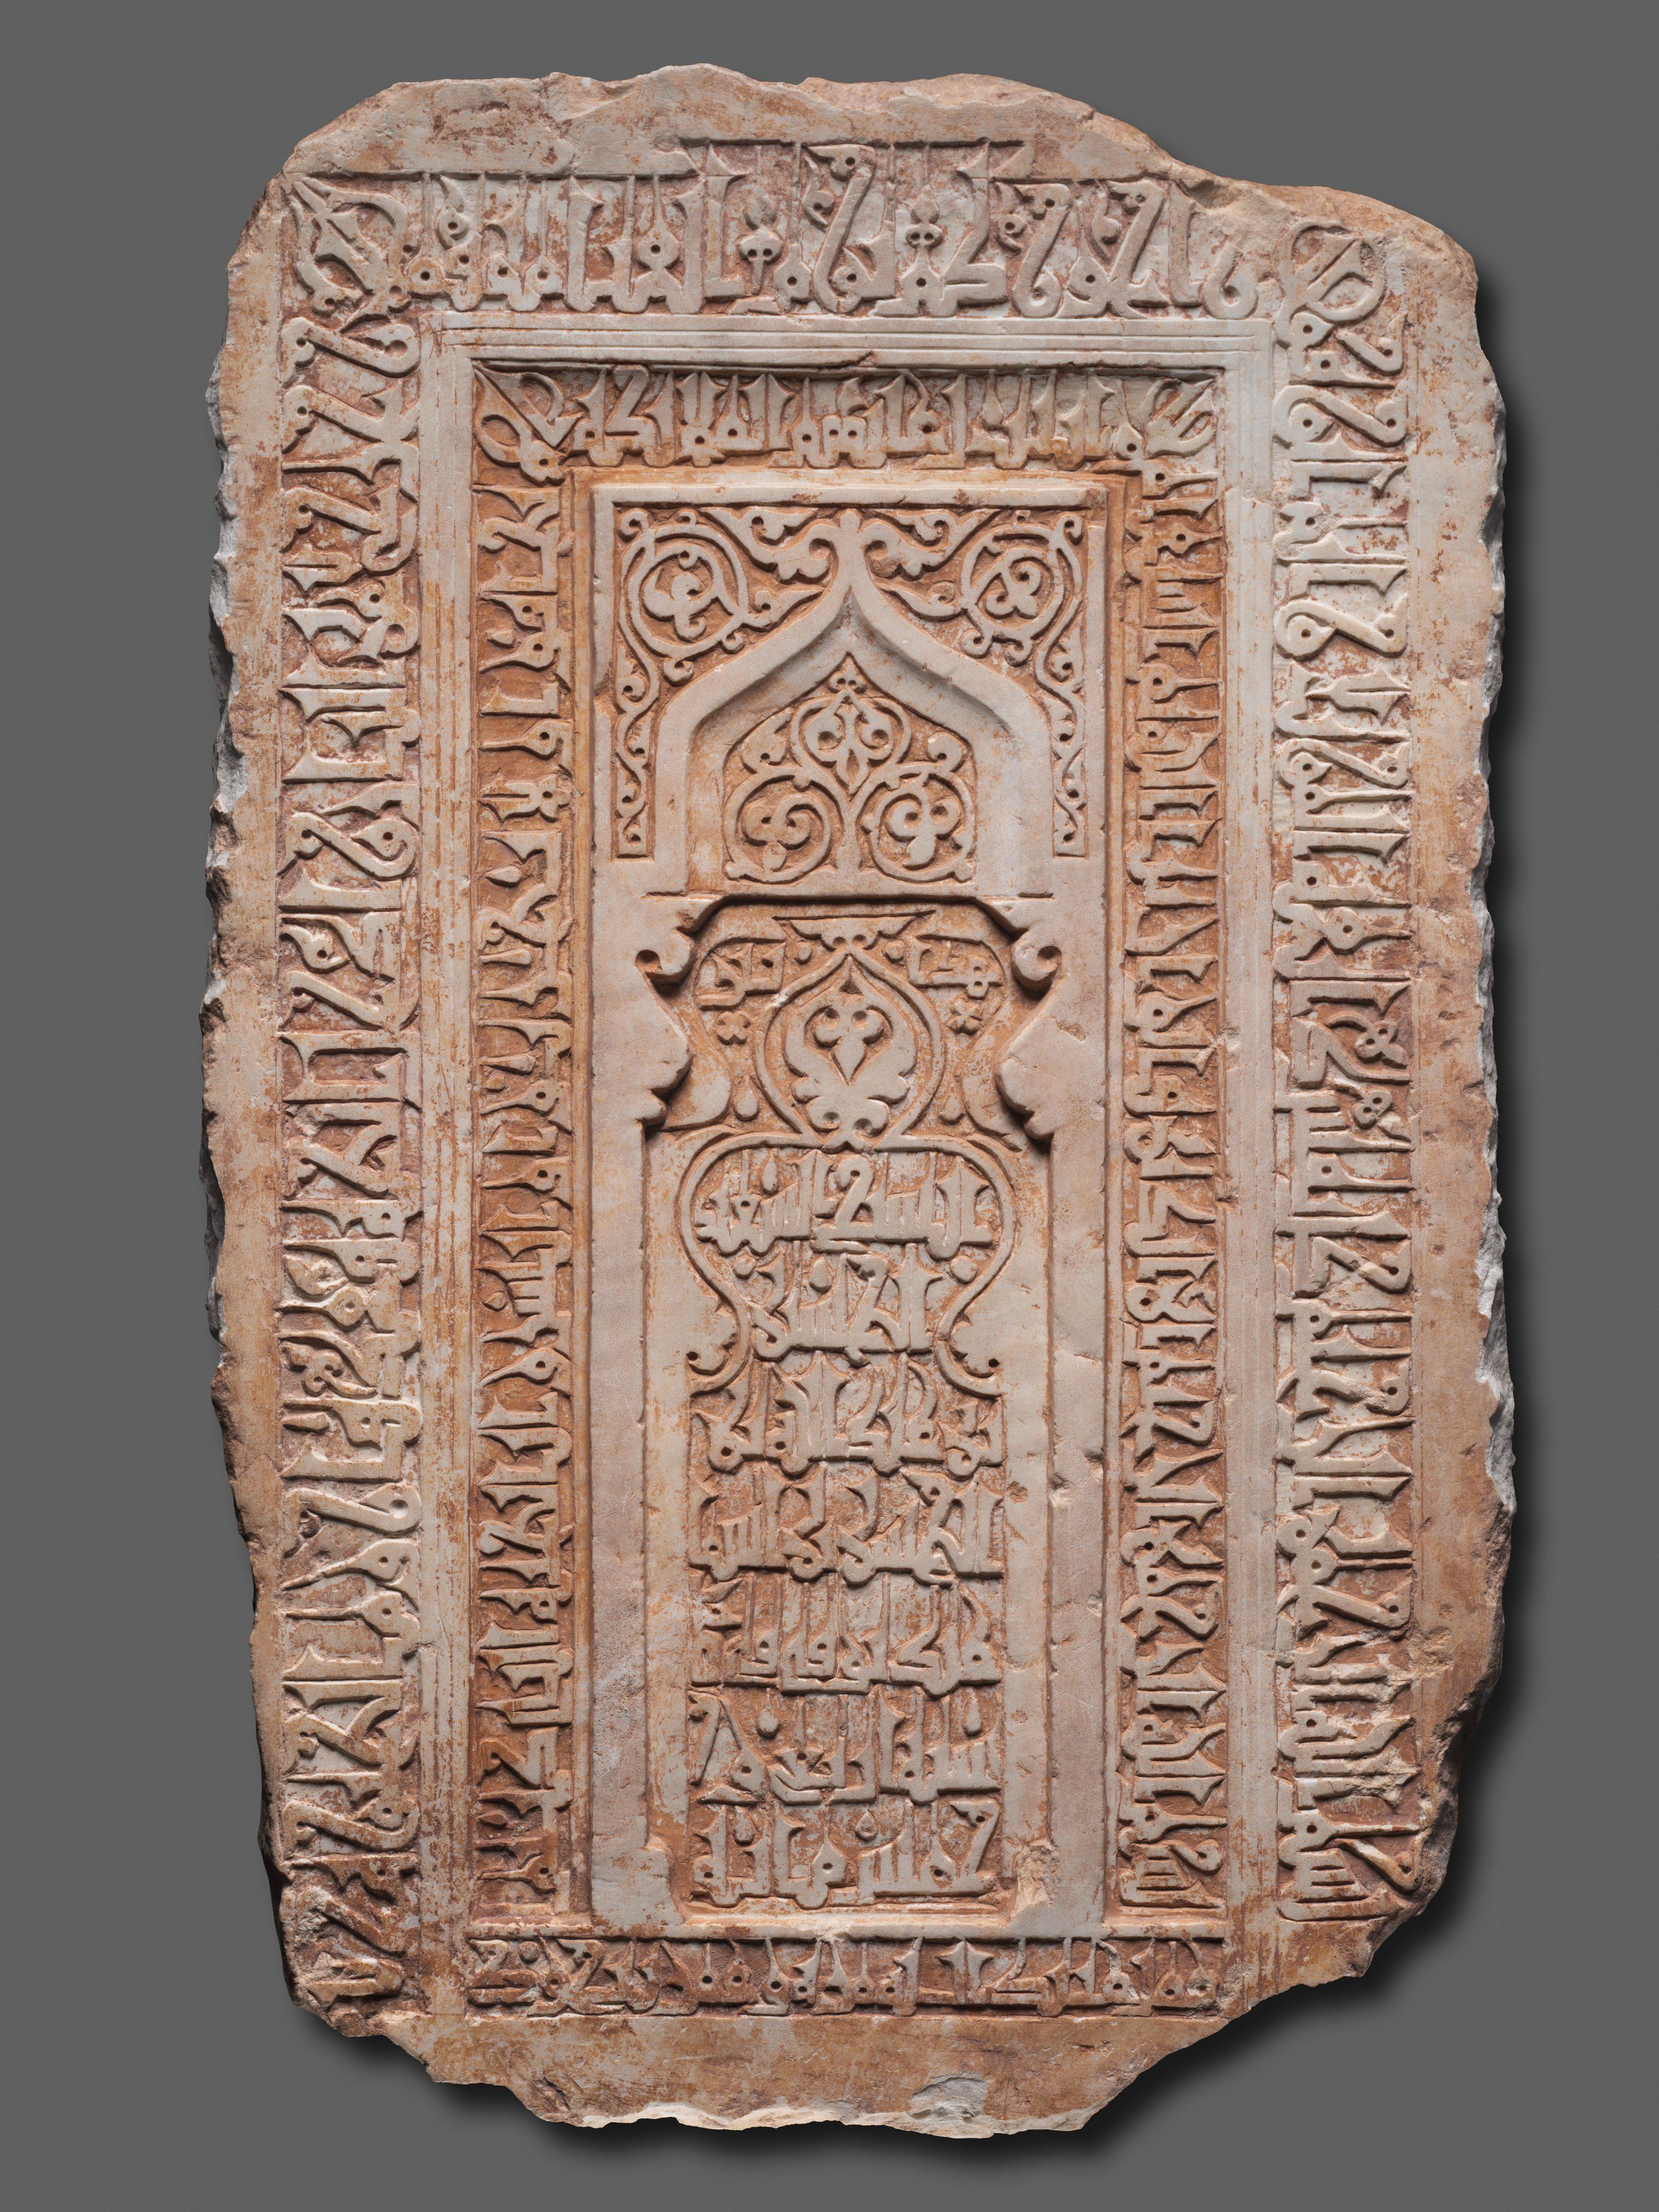 A 12th century fragment of Shaikh al-Husain ibn Abdallah ibn al-Hasan's tombstone, inscribed in Arabic Kufic calligraphy. The center is carved to resemble a mihrab with arabesque designs surrounding it.